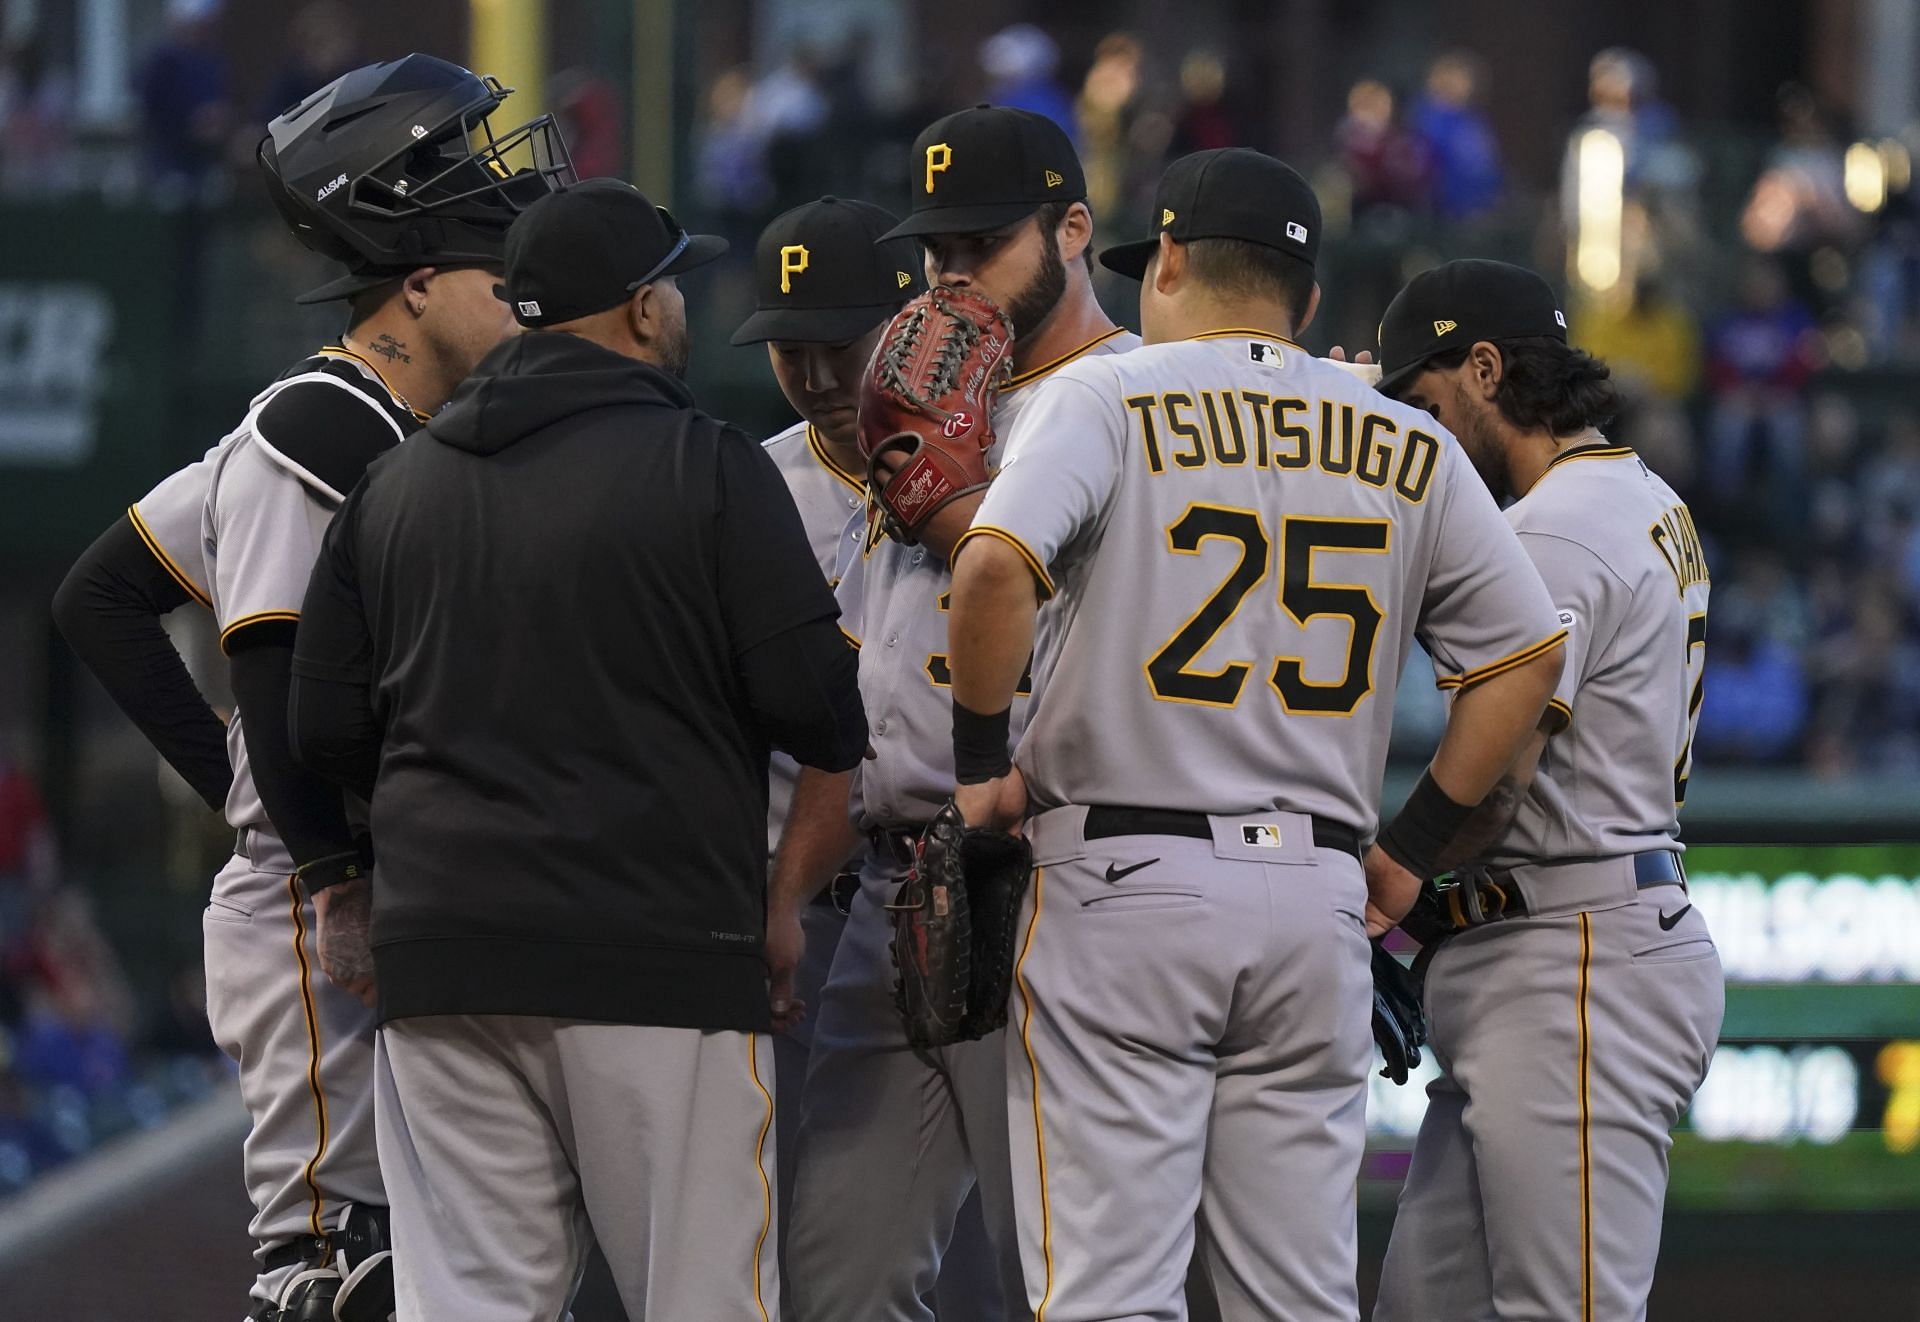 Pittsburgh Pirates discussing on the mound